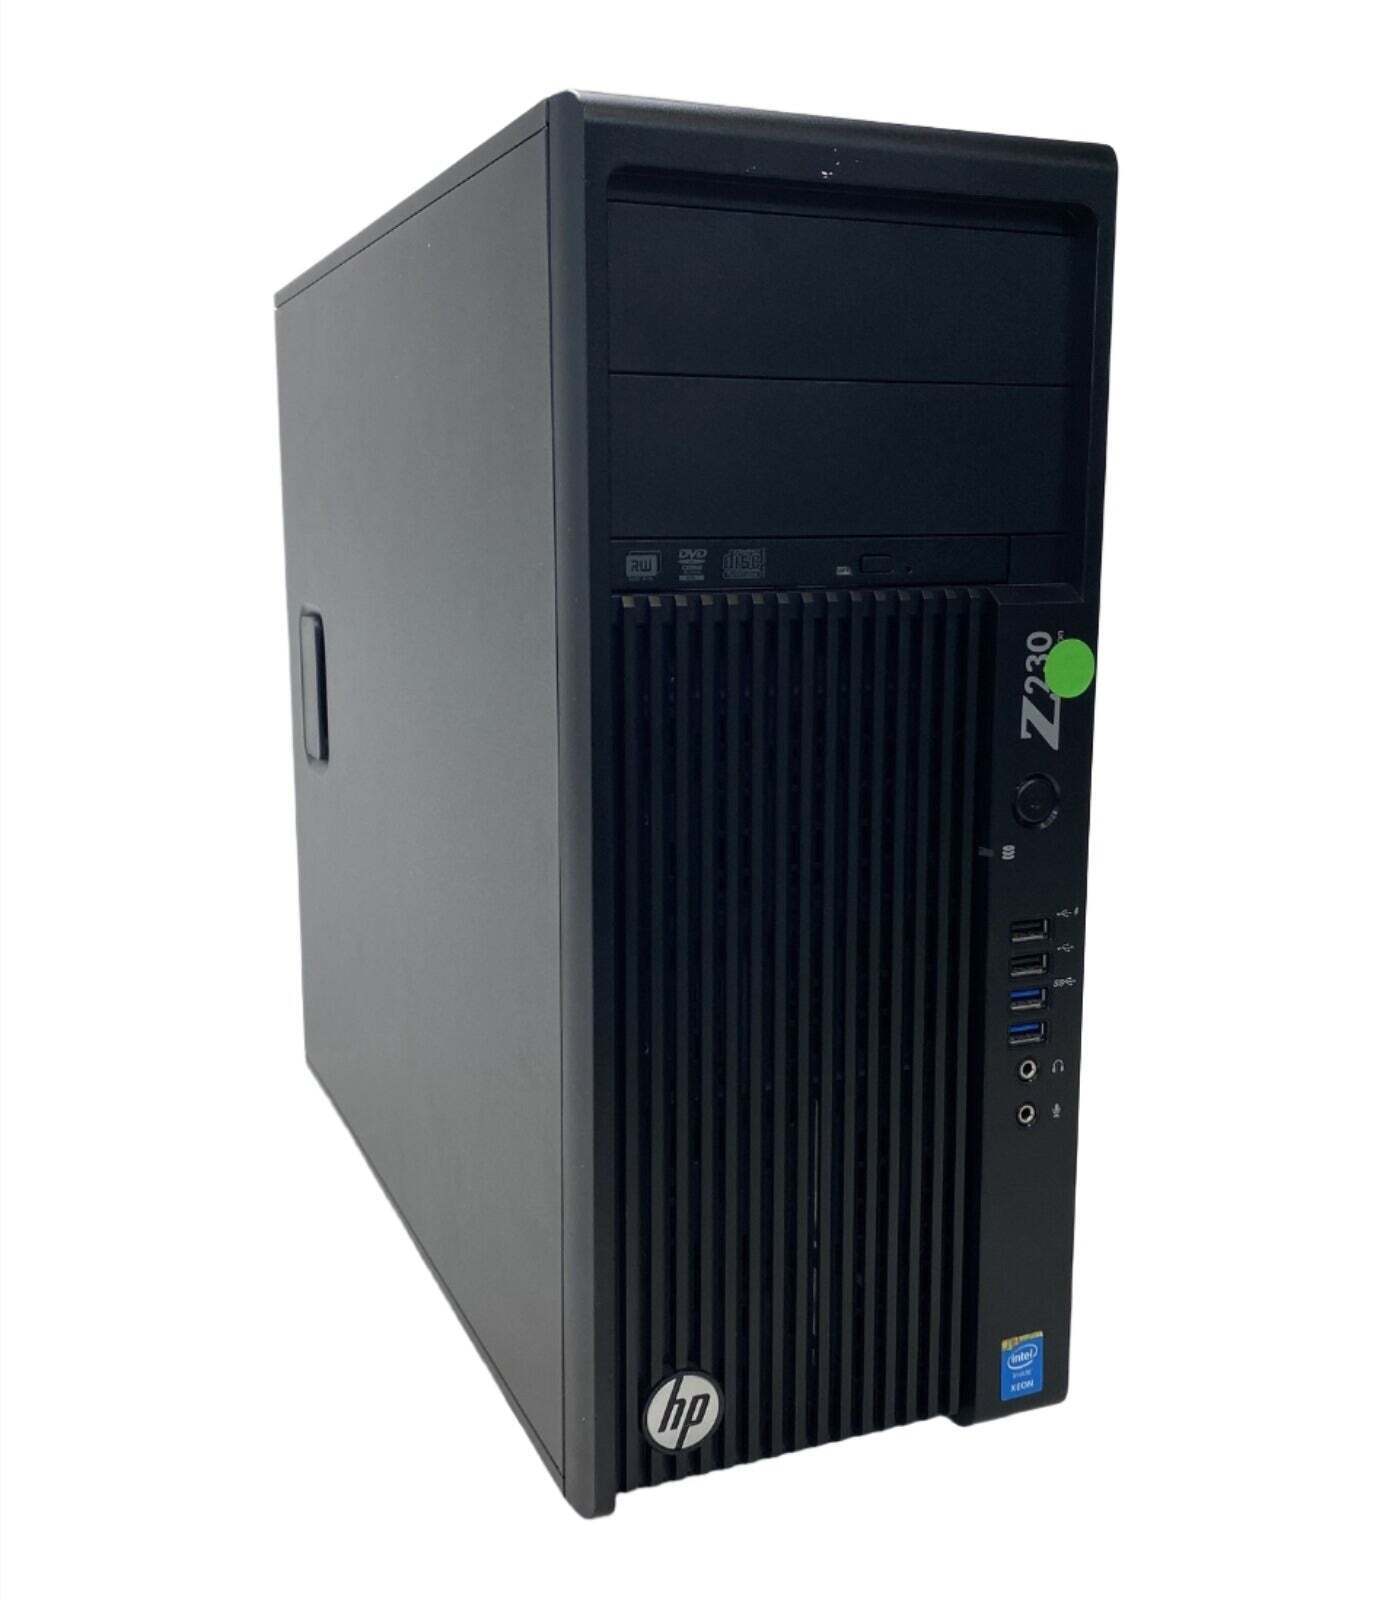 HP Z230 Workstation Towers Xeon E3-1231 V3 3.20ghz 8GB Ram NO HDD